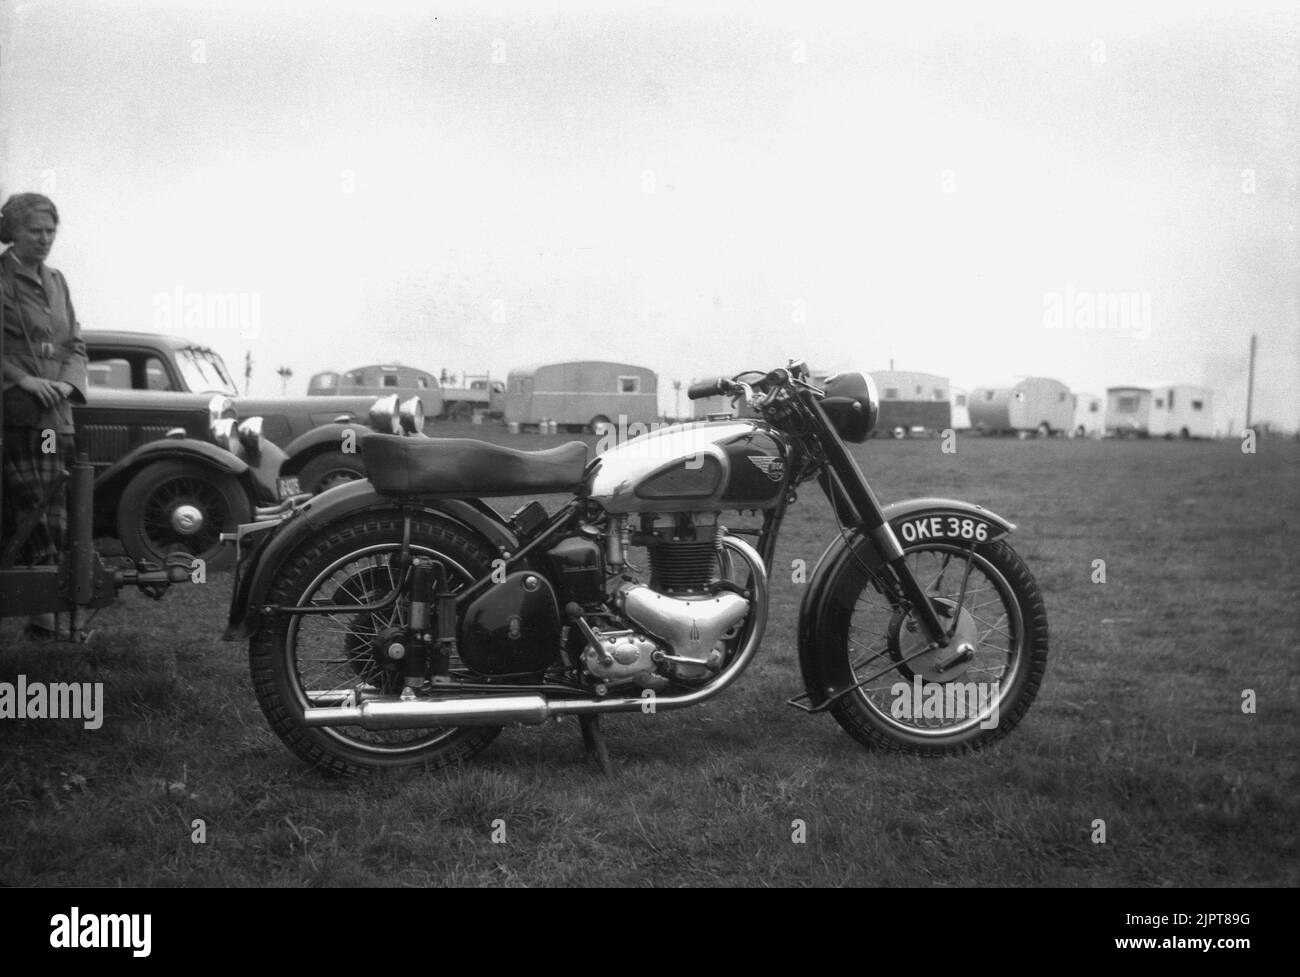 1950s, historical, outside in a field at a caravan site, a lady, standing by some motorcars looking at a British made BSA motorcycle of the era parked on the grass, England, UK. Founded in 1861 as the Birmingham Small Arms Company Ltd, for the production of firearms, a motorcycle division of BSA was established in 1903, and the first motorcycle released in 1910. In the 1950s, BSA Motorcycles was the largest motorcycle maker in the world. Stock Photo